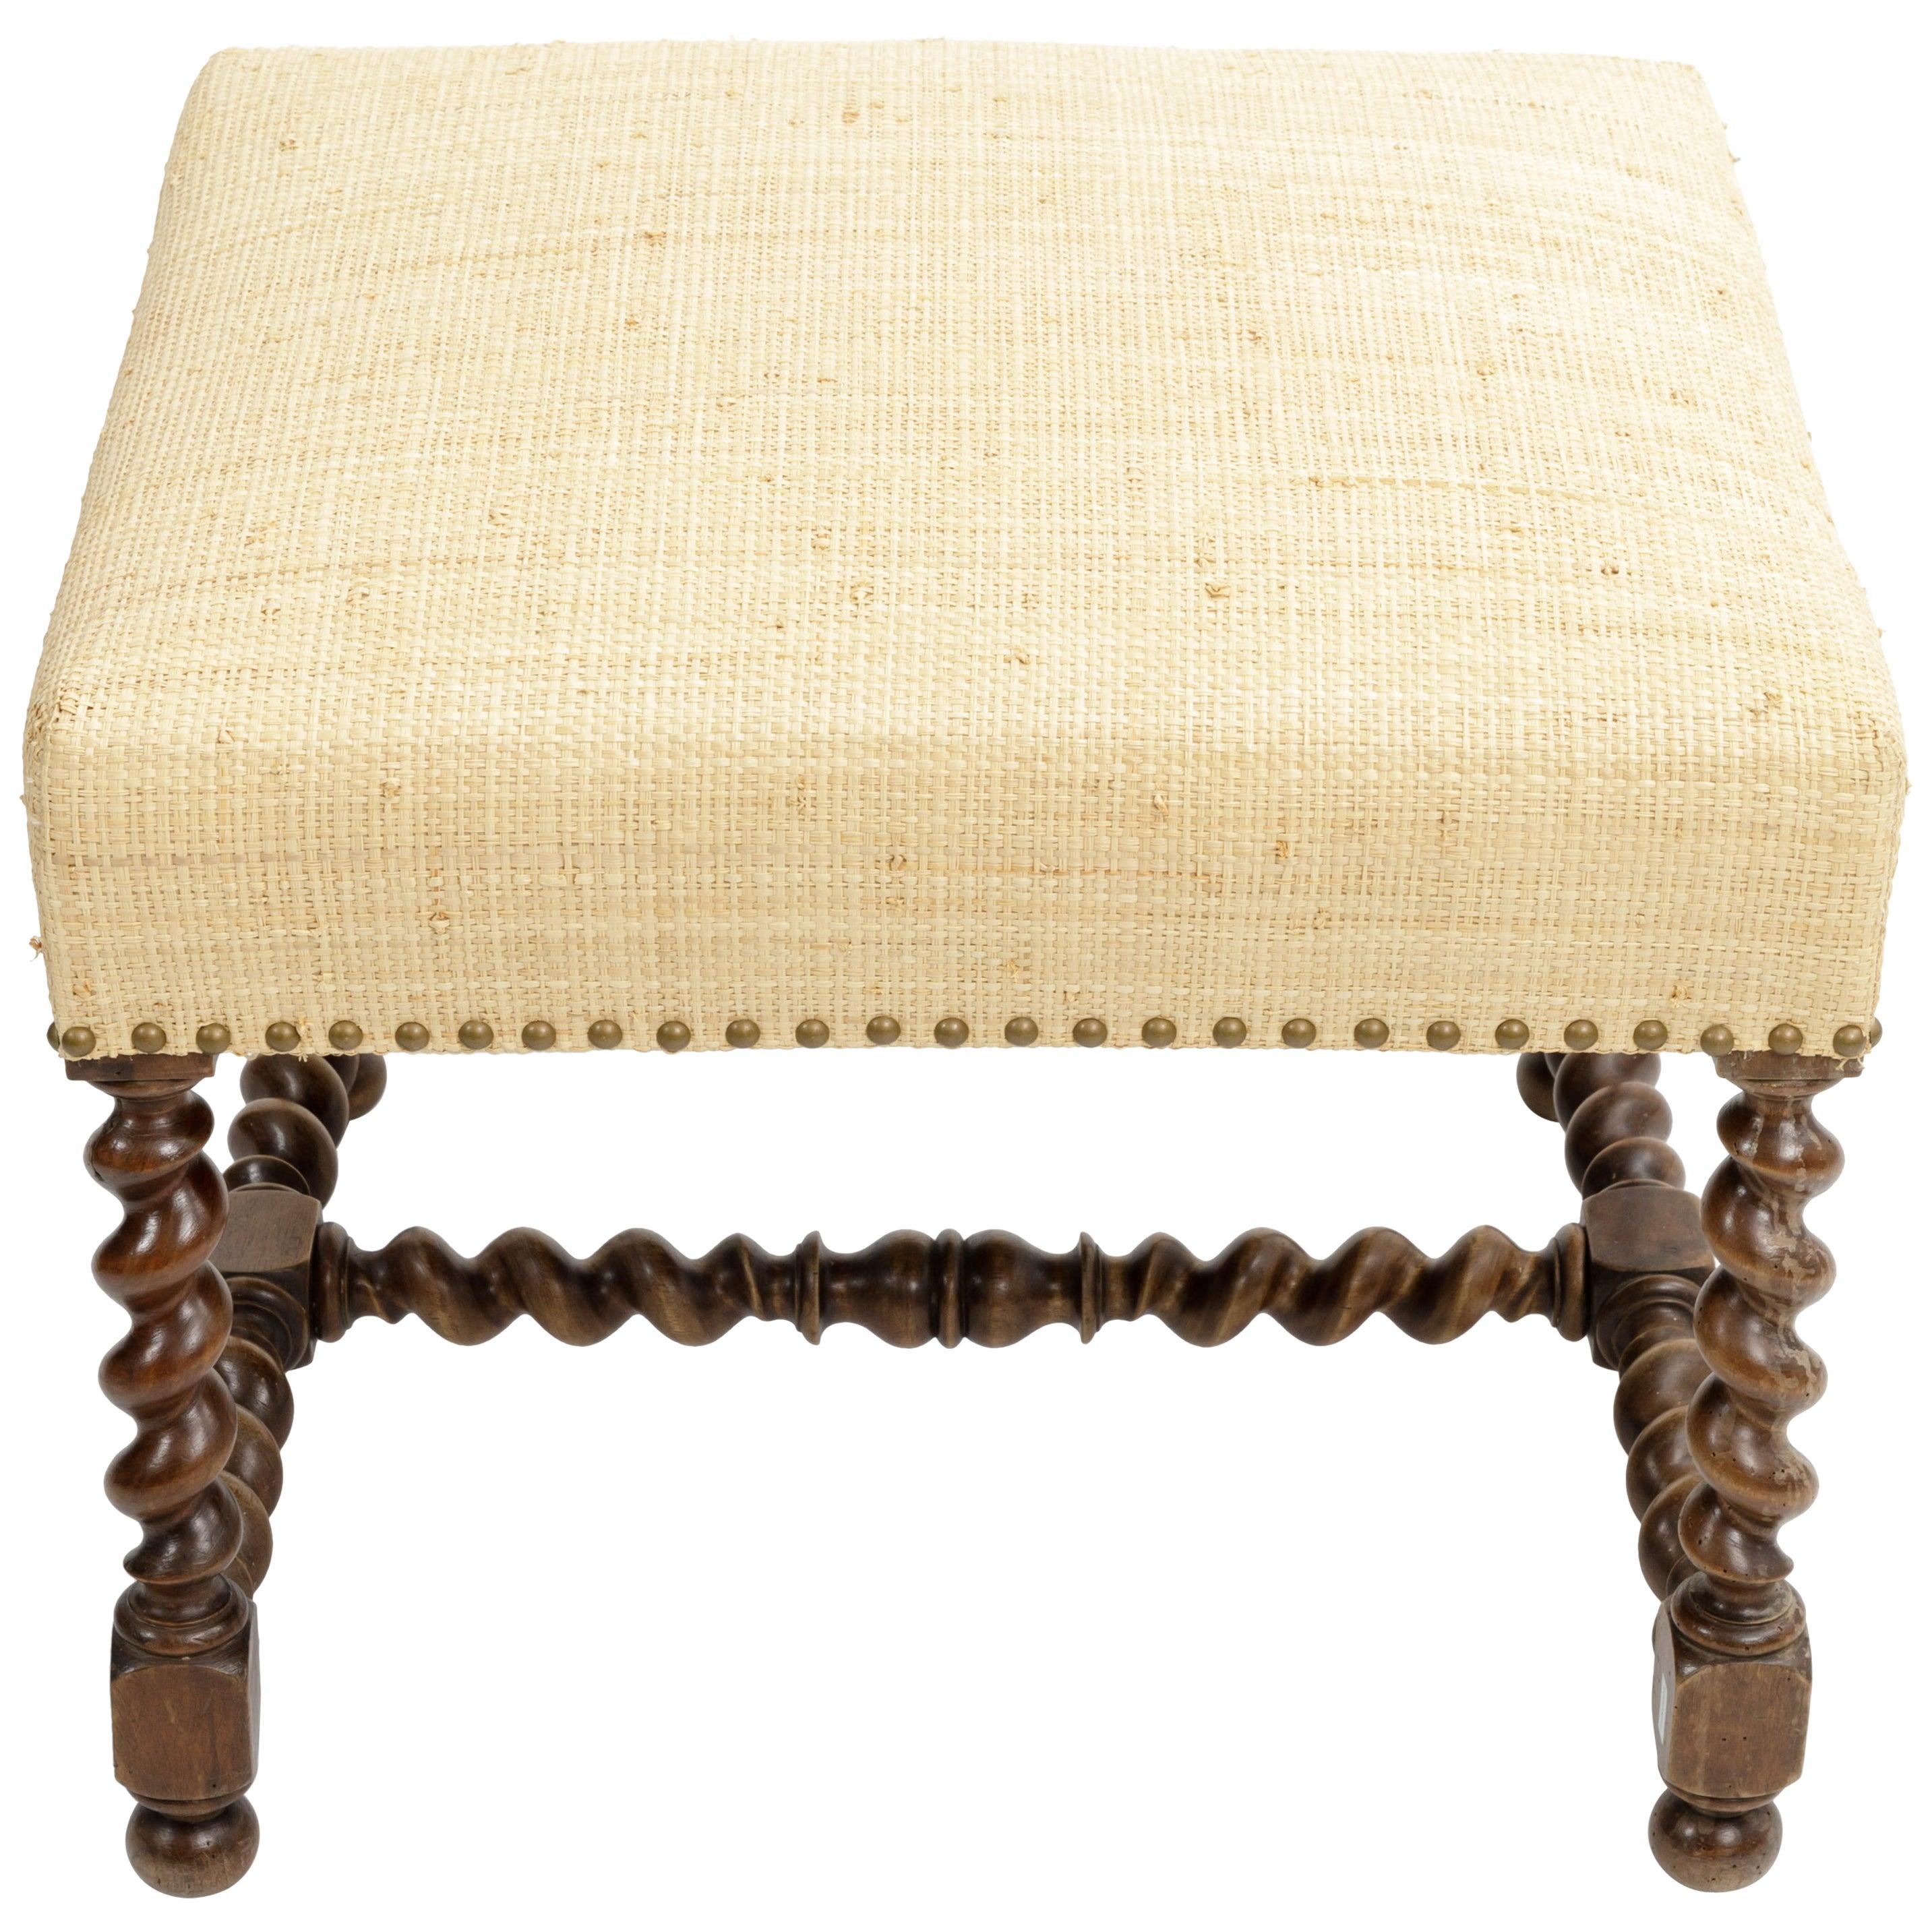 Antique Barley Twist Stool with Cream Linen Upholstery, Europe, 19th Century